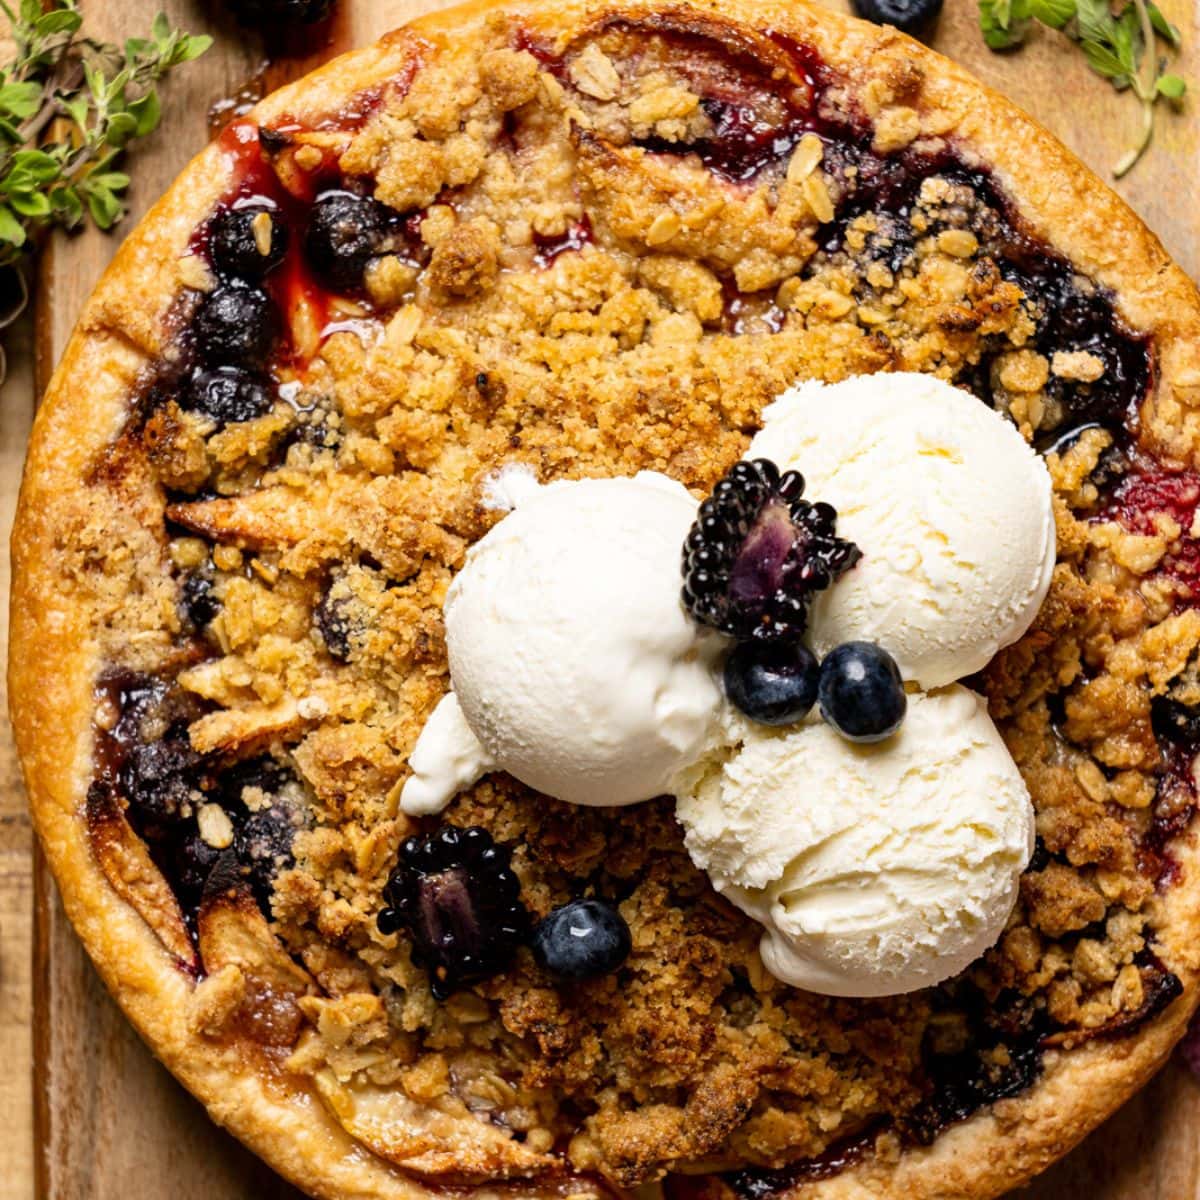 Baked whole pie on a cutting board on a brown wood table with fresh berries and scoops of ice cream.